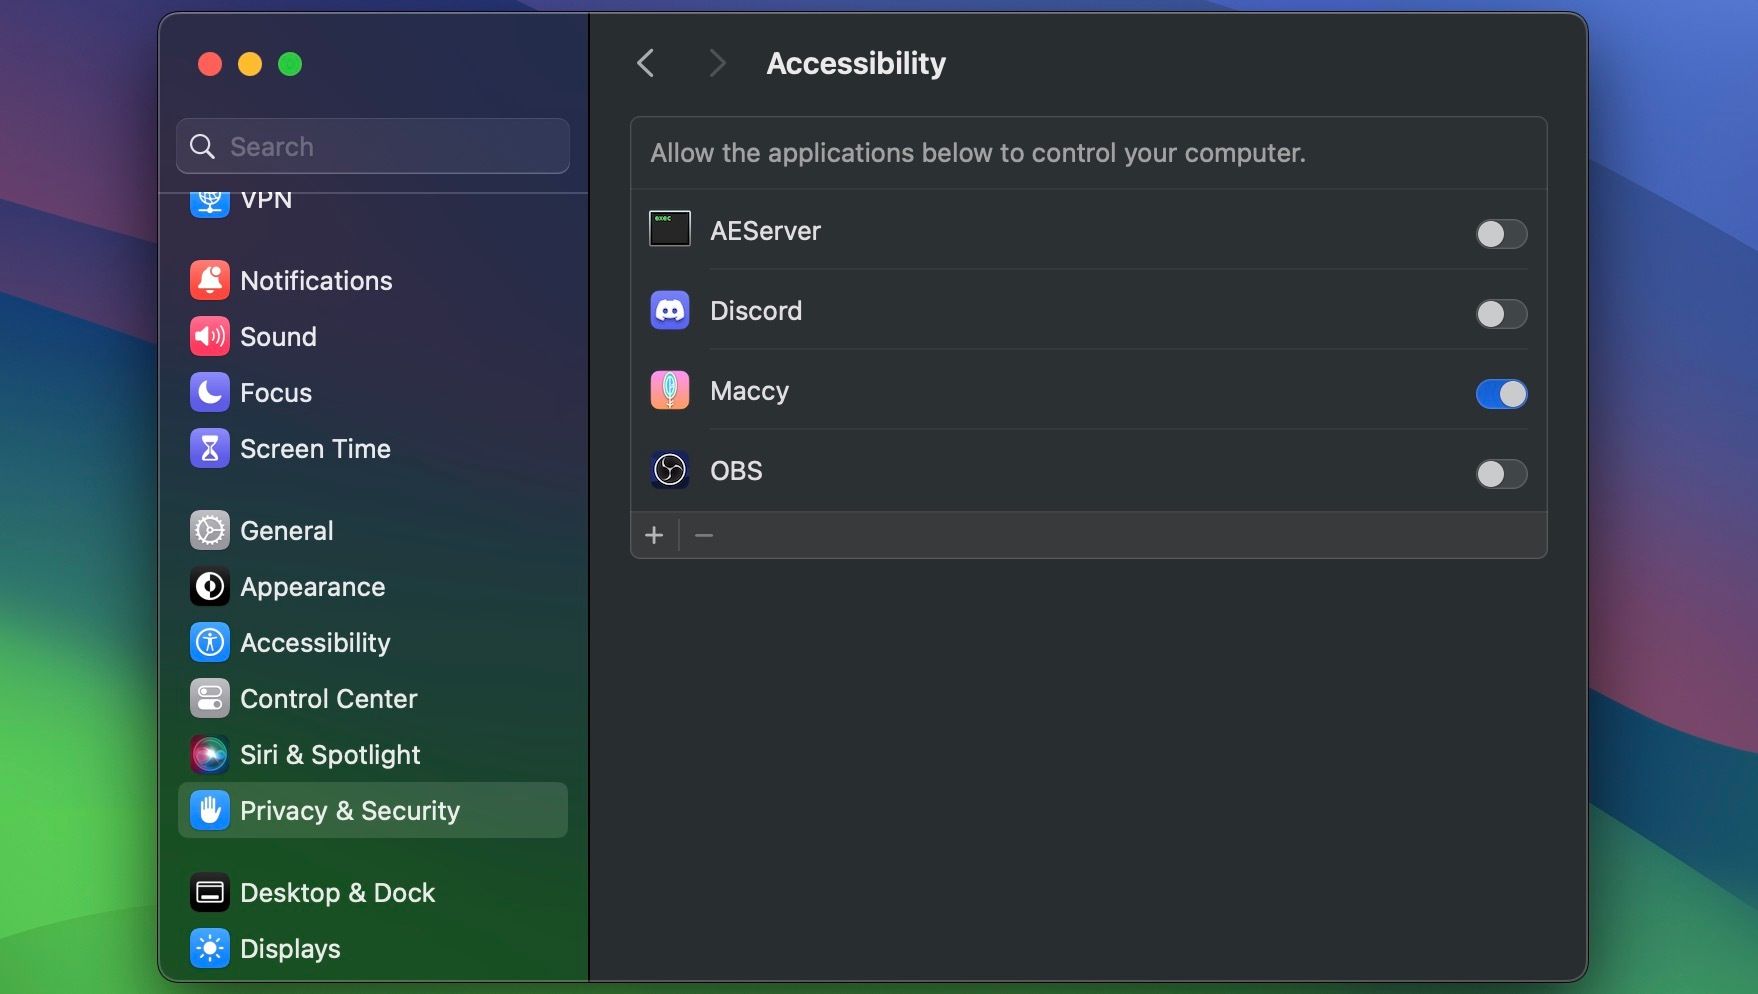 Changing Accessibility settings for Maccy app